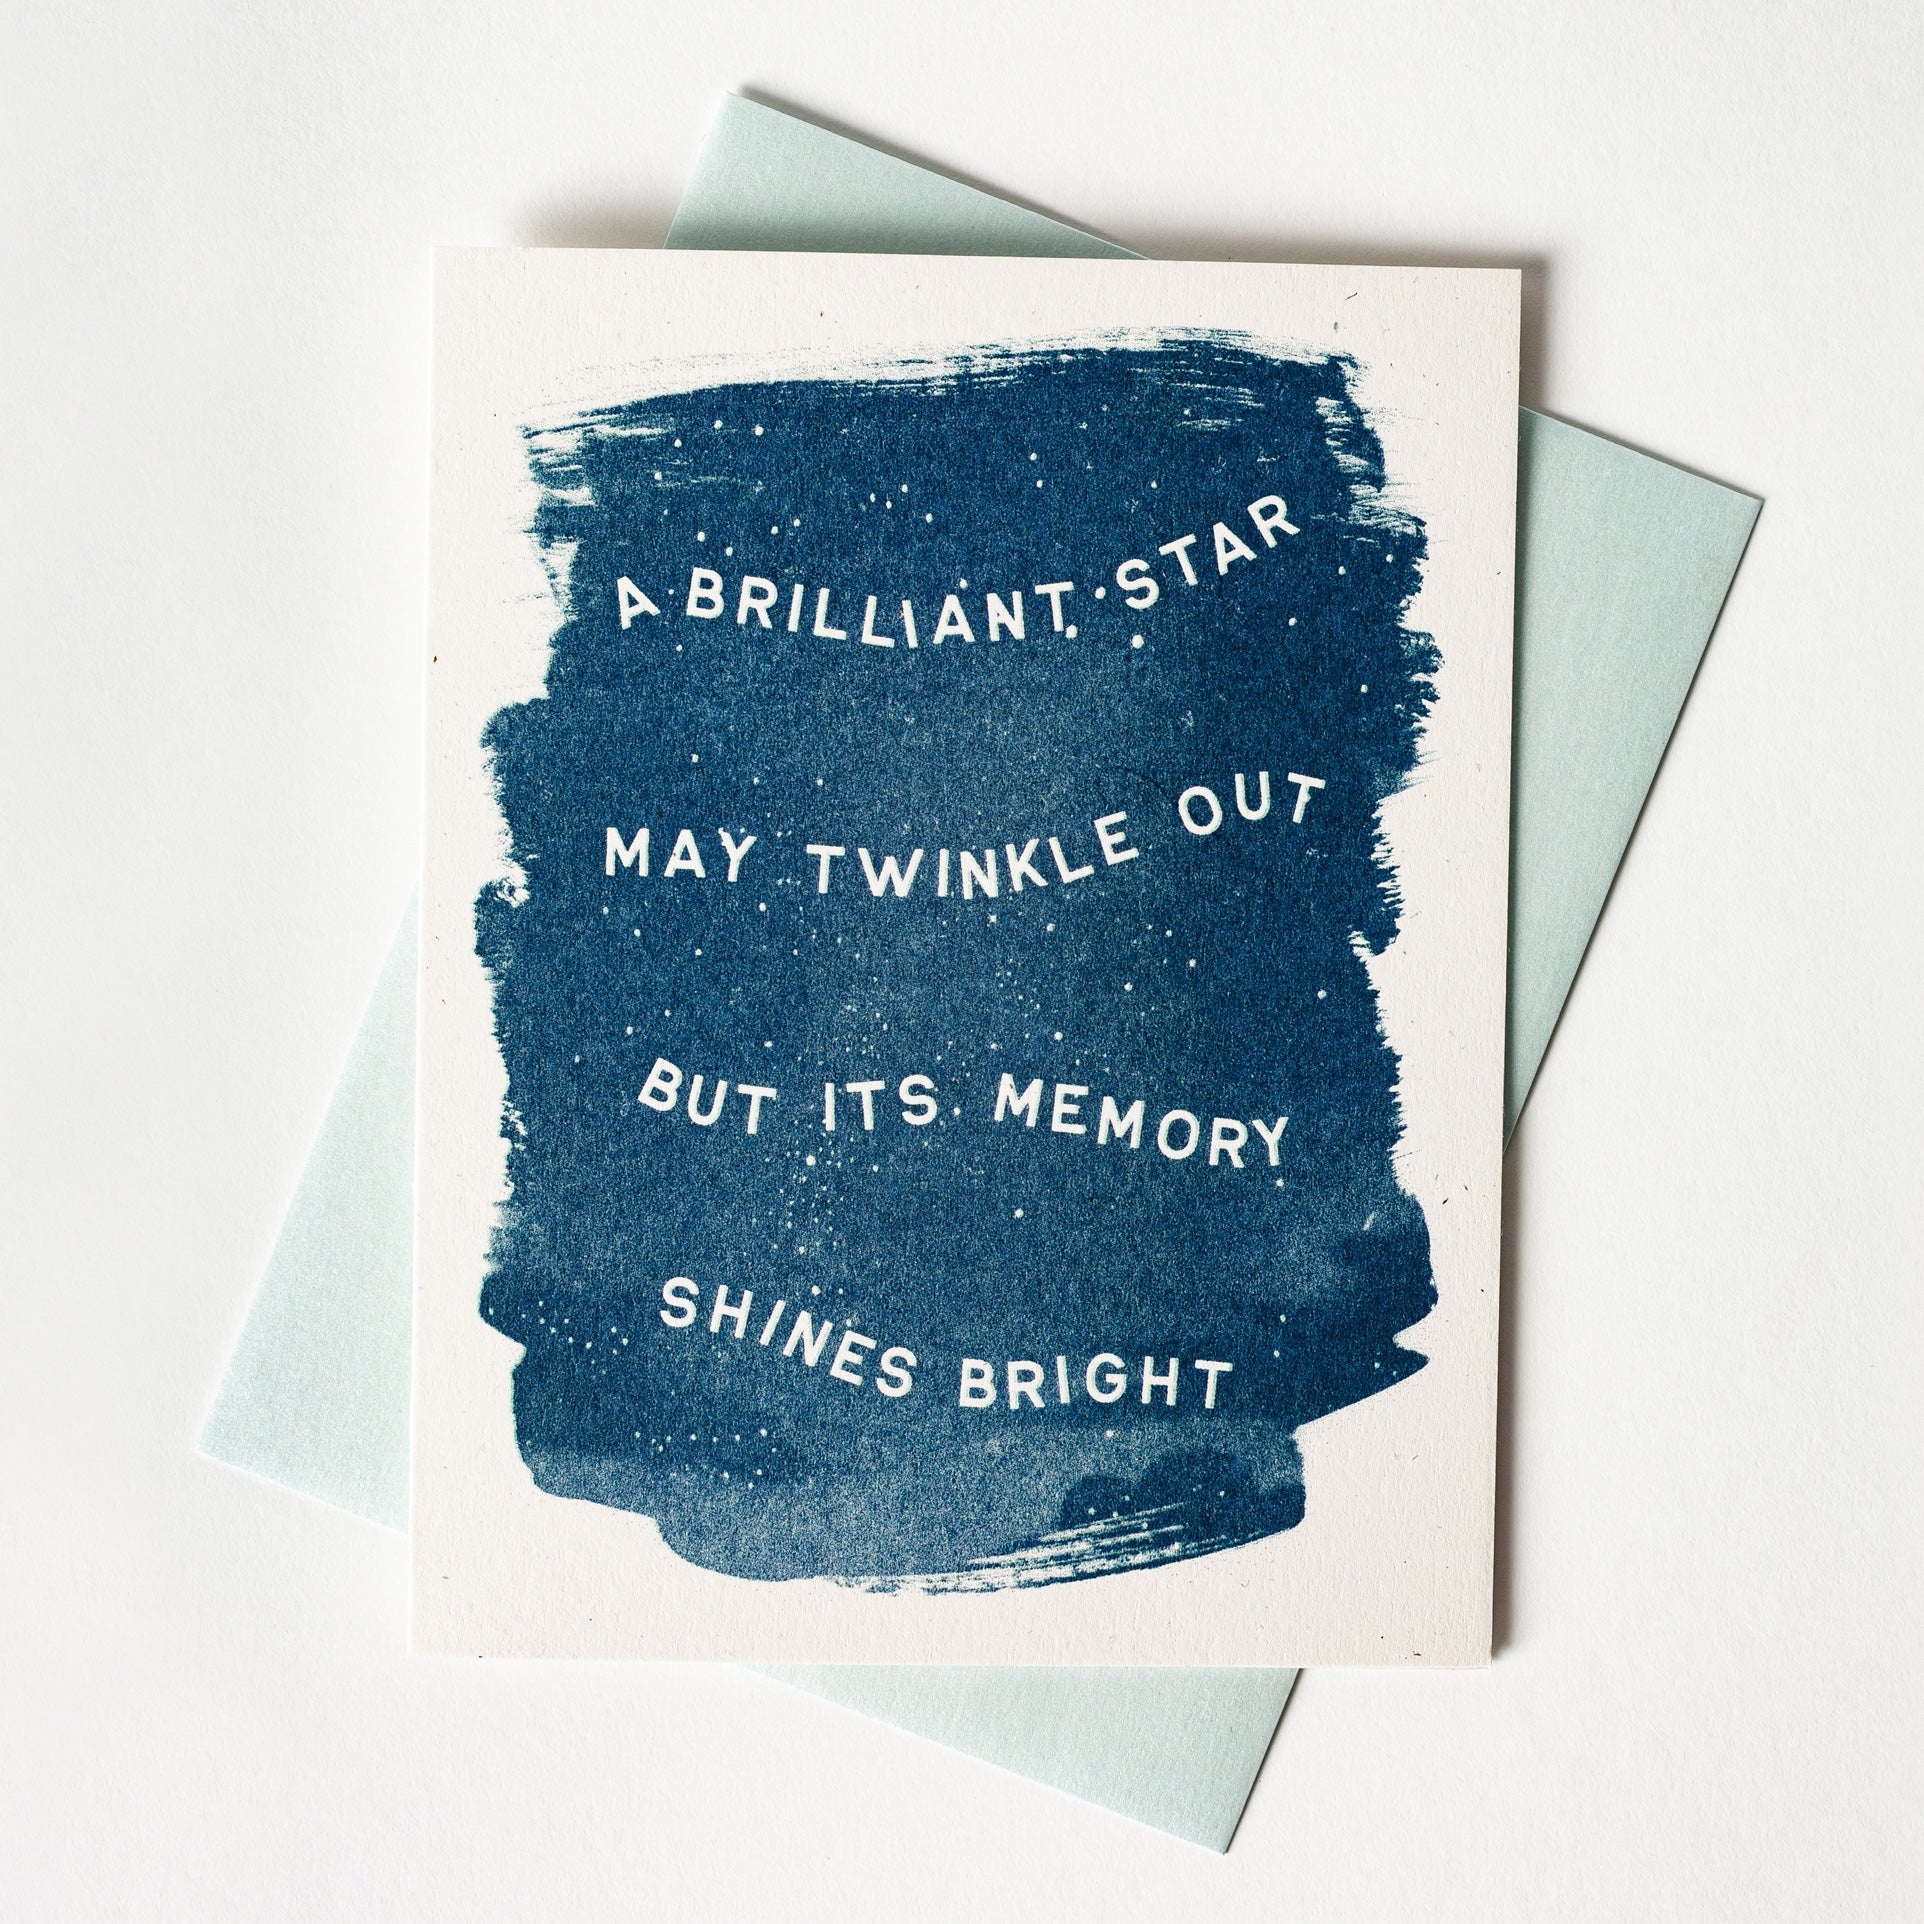 A Brilliant Star May Twinkle Out - Risograph Sympathy Card